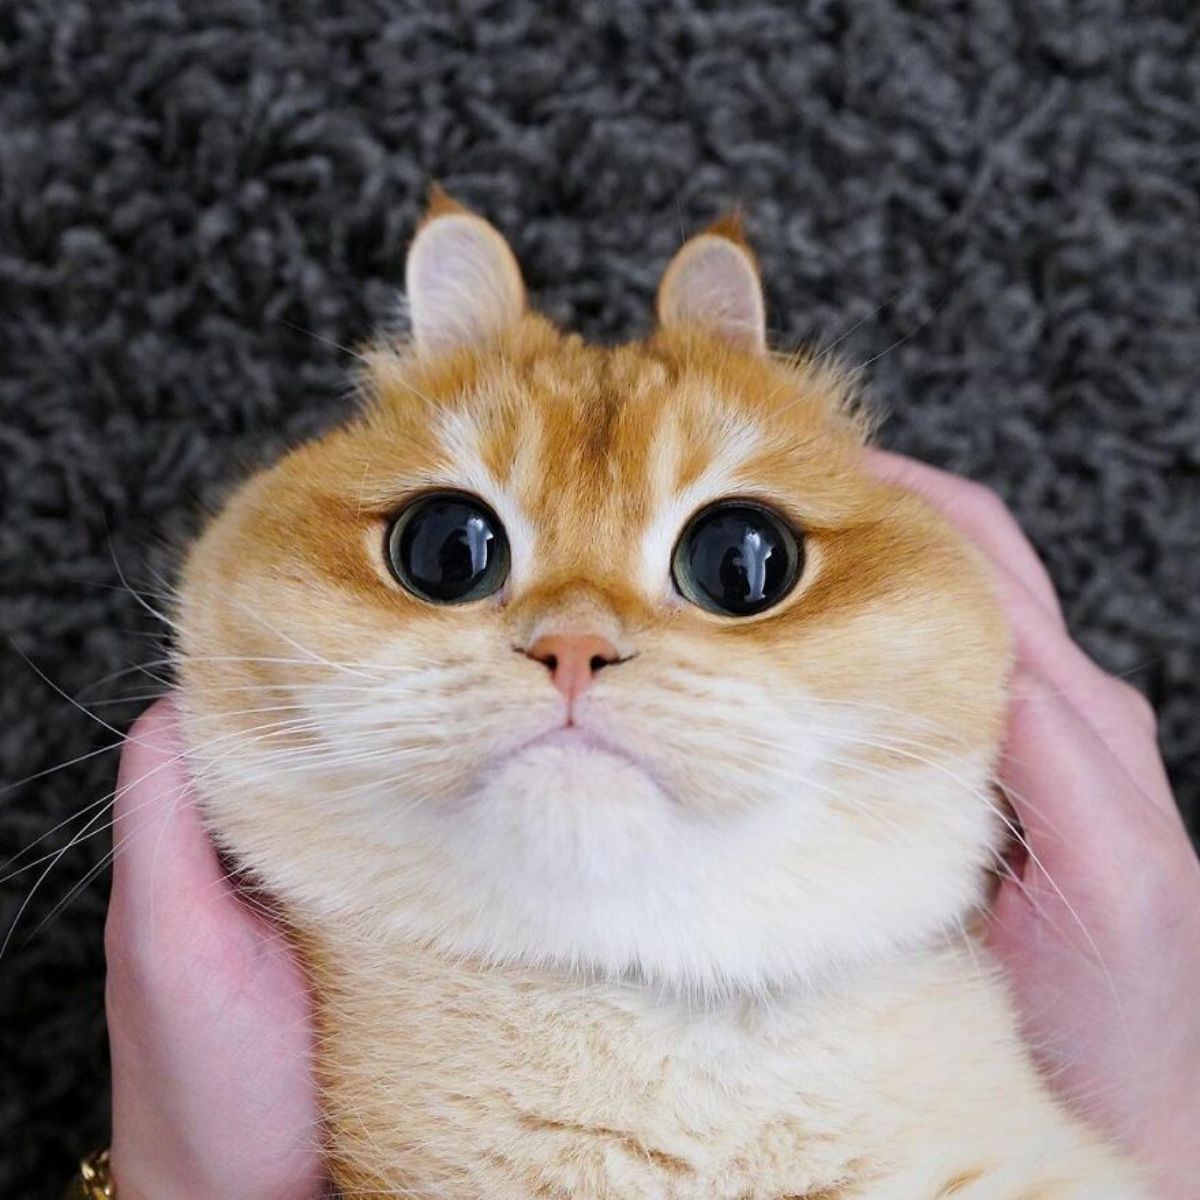 orange cat with large black eyes having its face held by someone